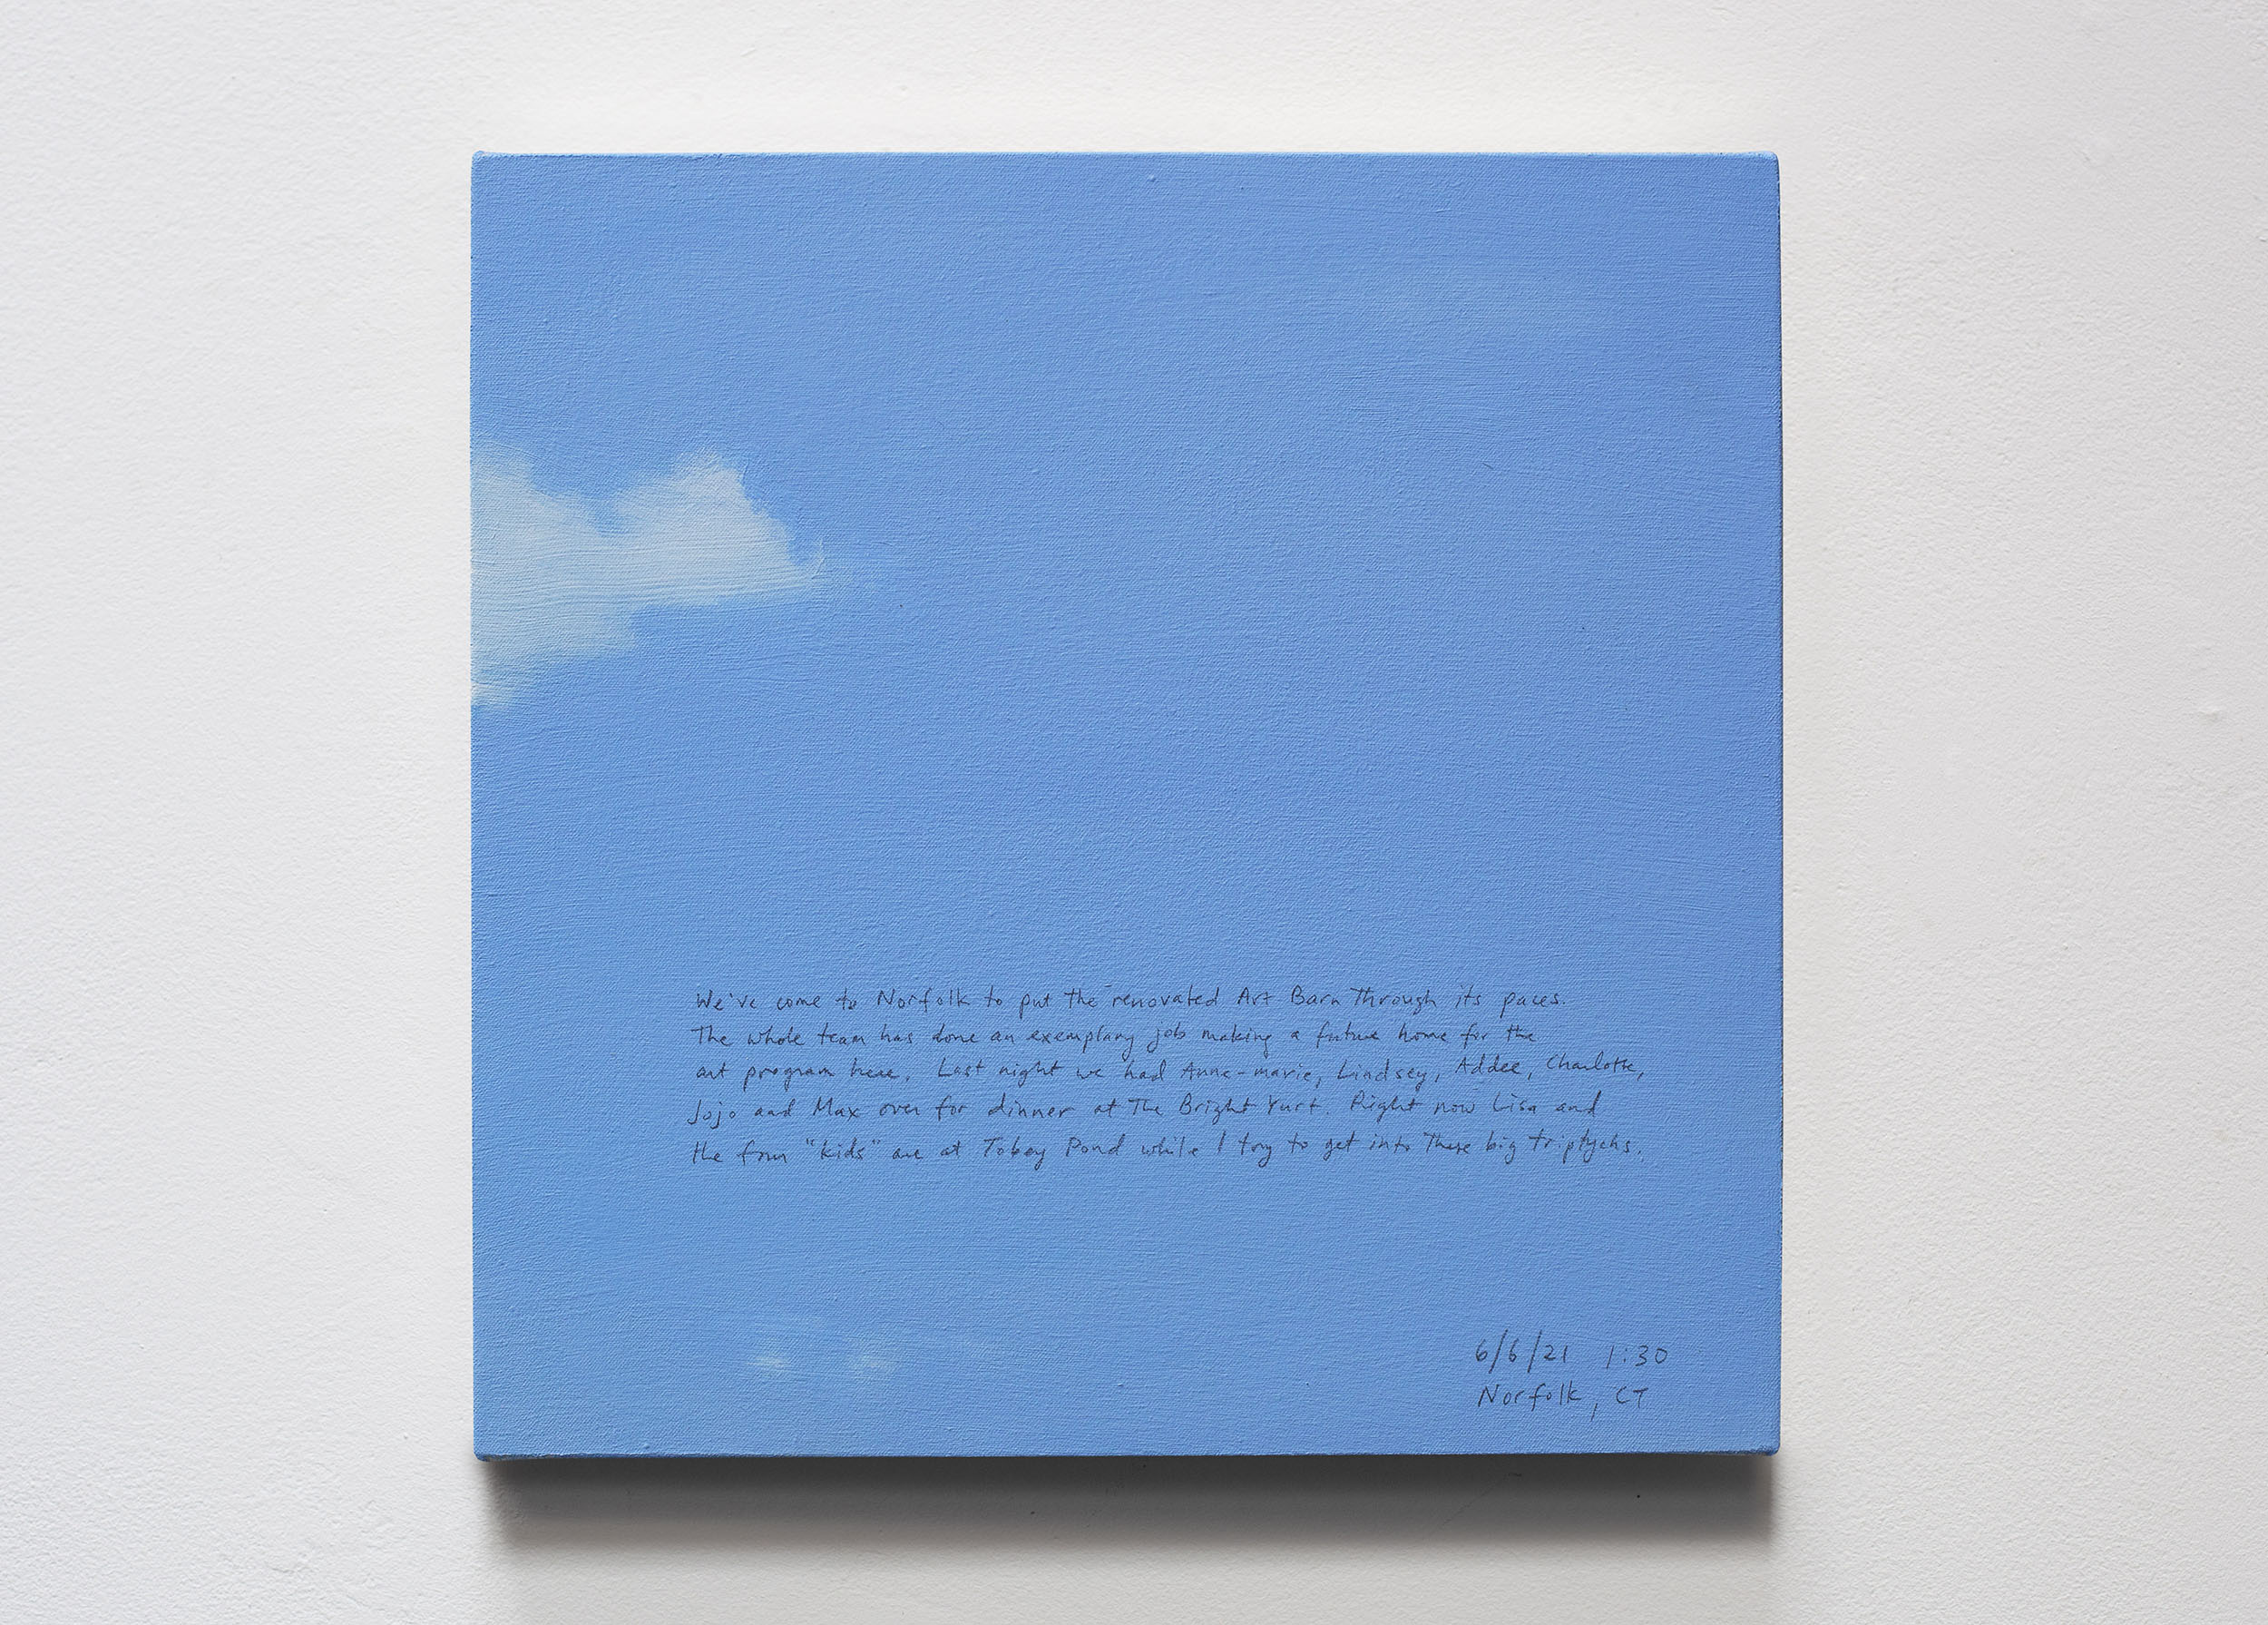 A 14 × 14 inch, acrylic painting of the sky. A journal entry is handwritten on the painting:

“We’ve come to Norfolk to put the renovated Art Barn through its paces. The whole team has done an exemplary job making a future home for the art program here. Last night we had Anne-Marie, Lindsey, Addee, Charlotte, Jojo and Max over for dinner at the Bright Yurt. Right now Lisa and the four “kids” are at Tobey Pond while I try to get into these big triptychs.

6/6/21 1:30
Norfolk, CT”